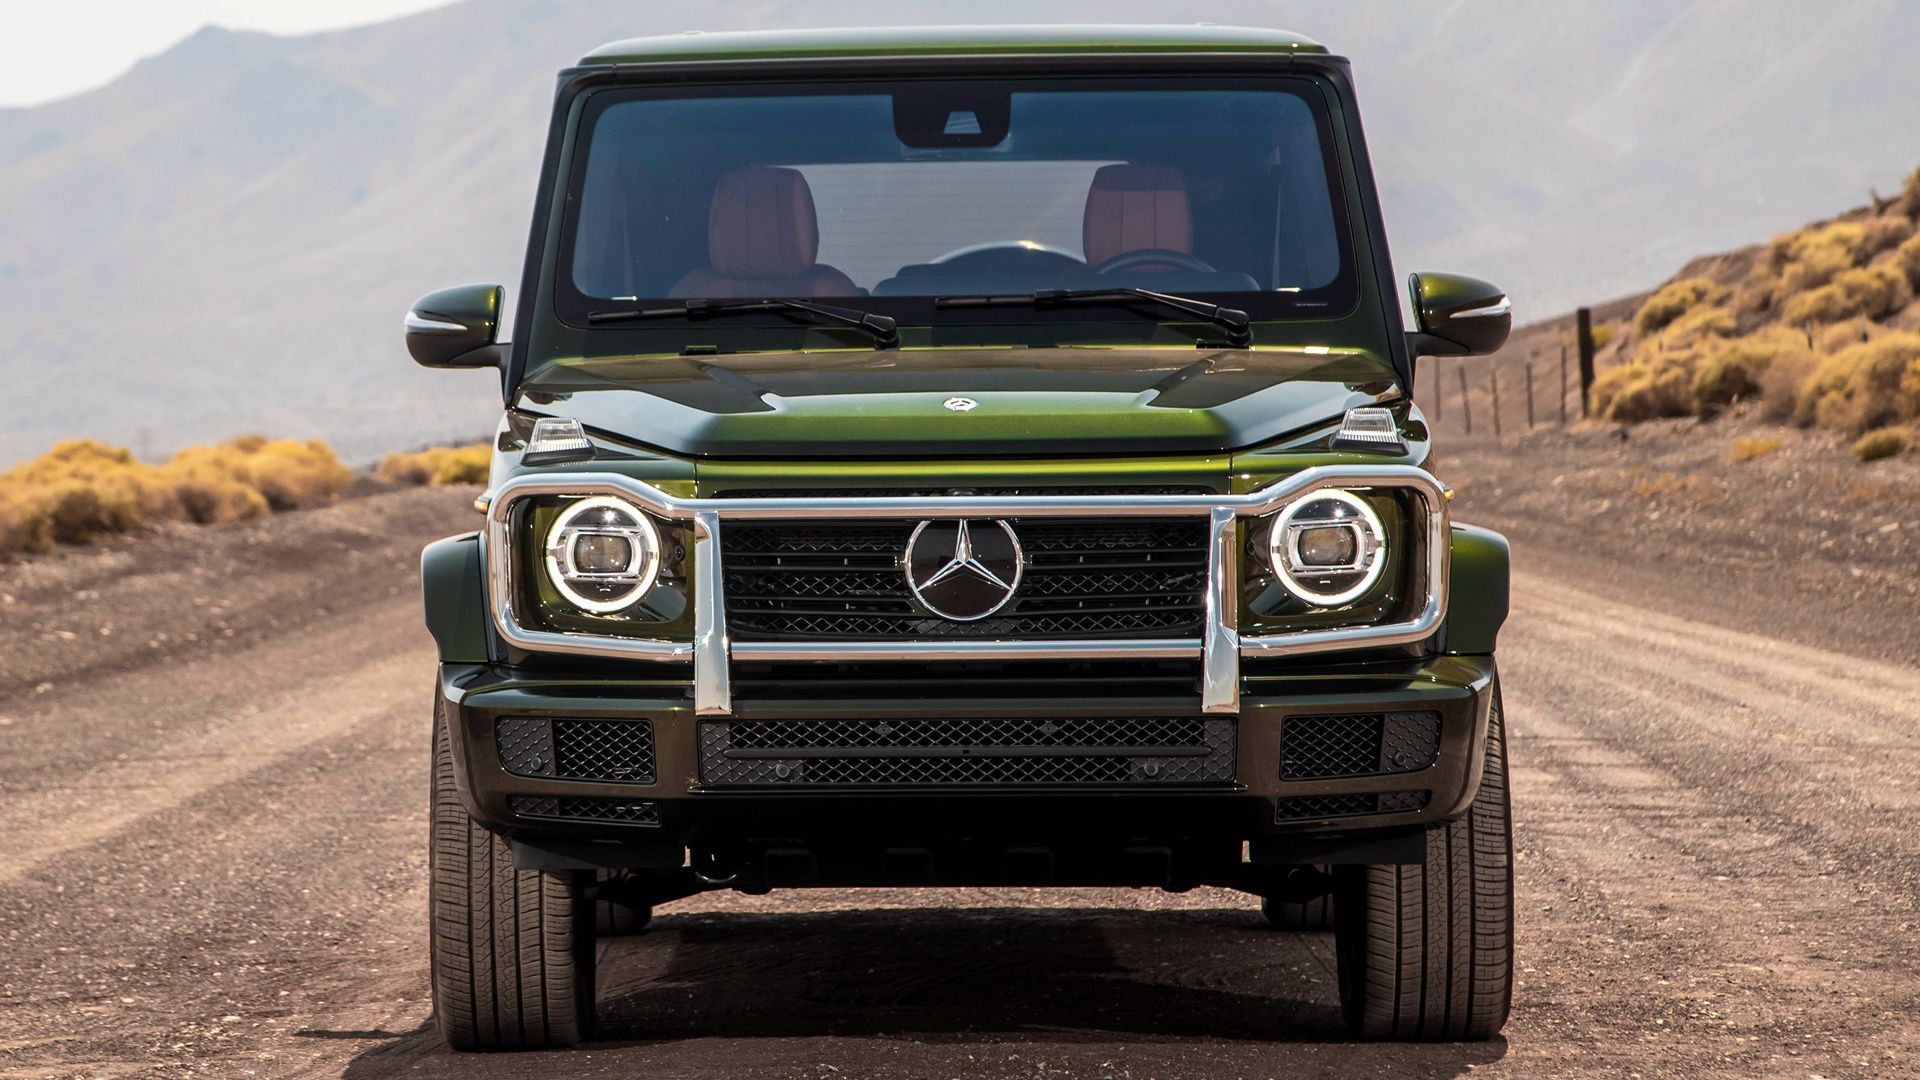 Mercedes Benz G Class (US) And HD Image